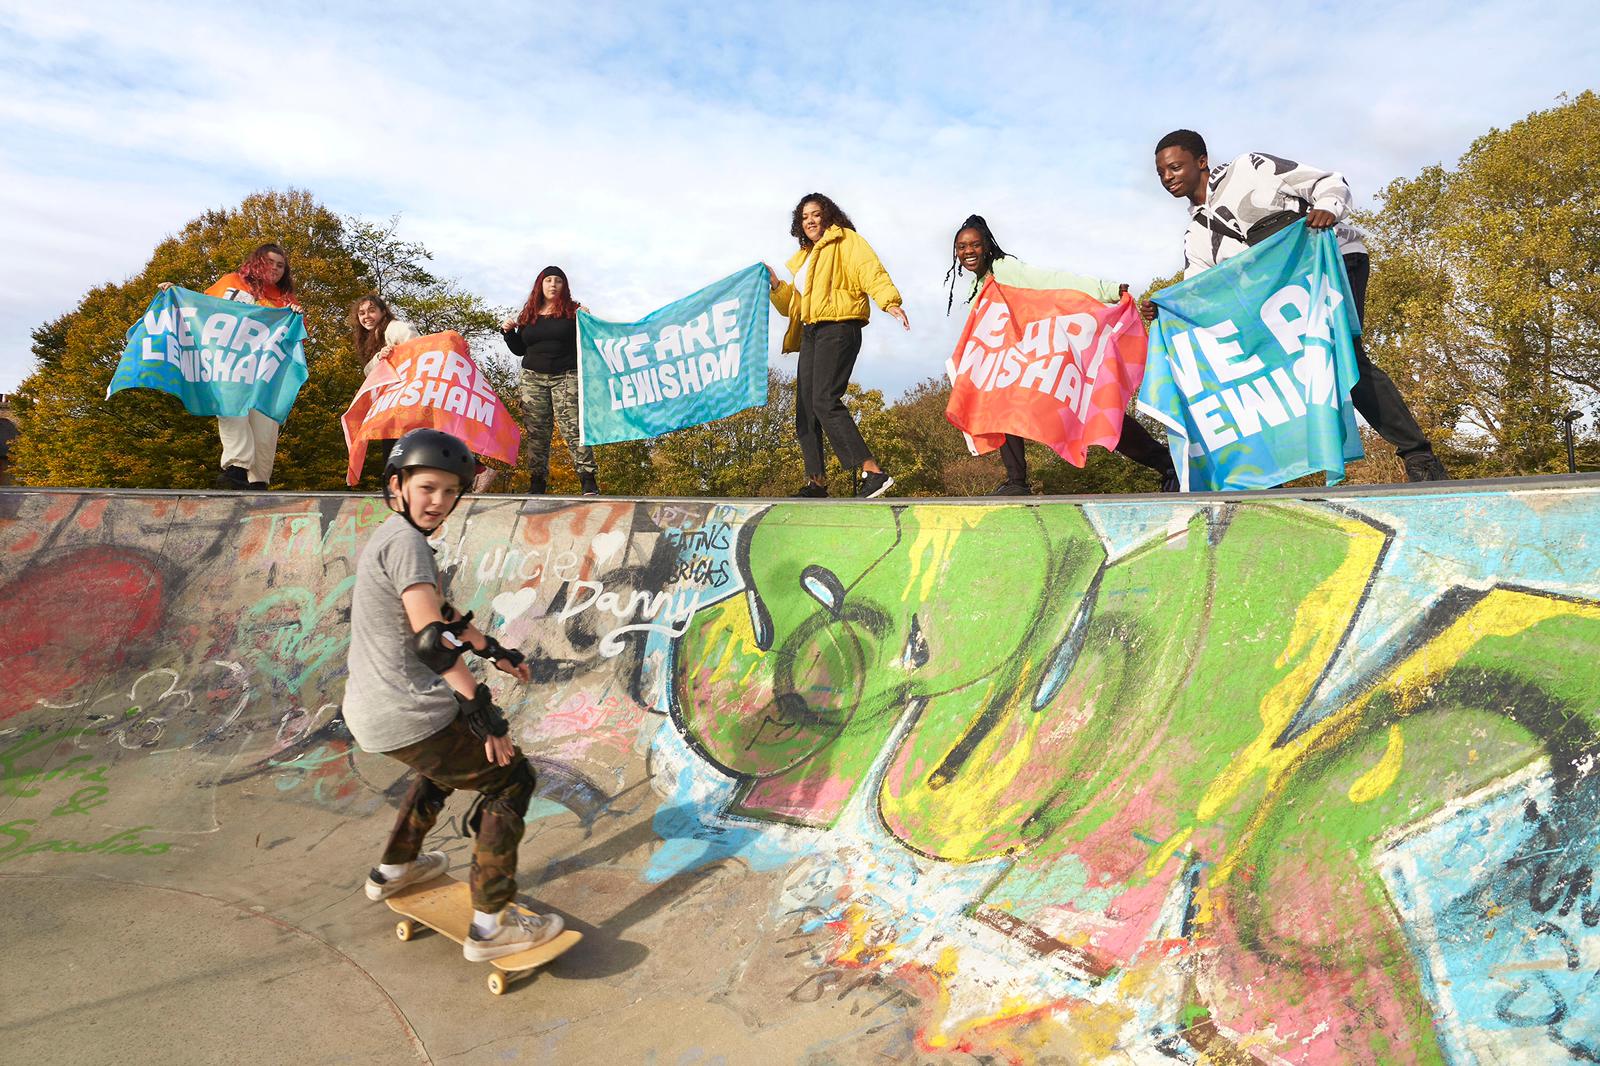 A photograph of a group of people at a skate ramp. They hold signs that read: We Are Lewisham. In the foreground, a person wearing a helmet is shown on a skateboard.